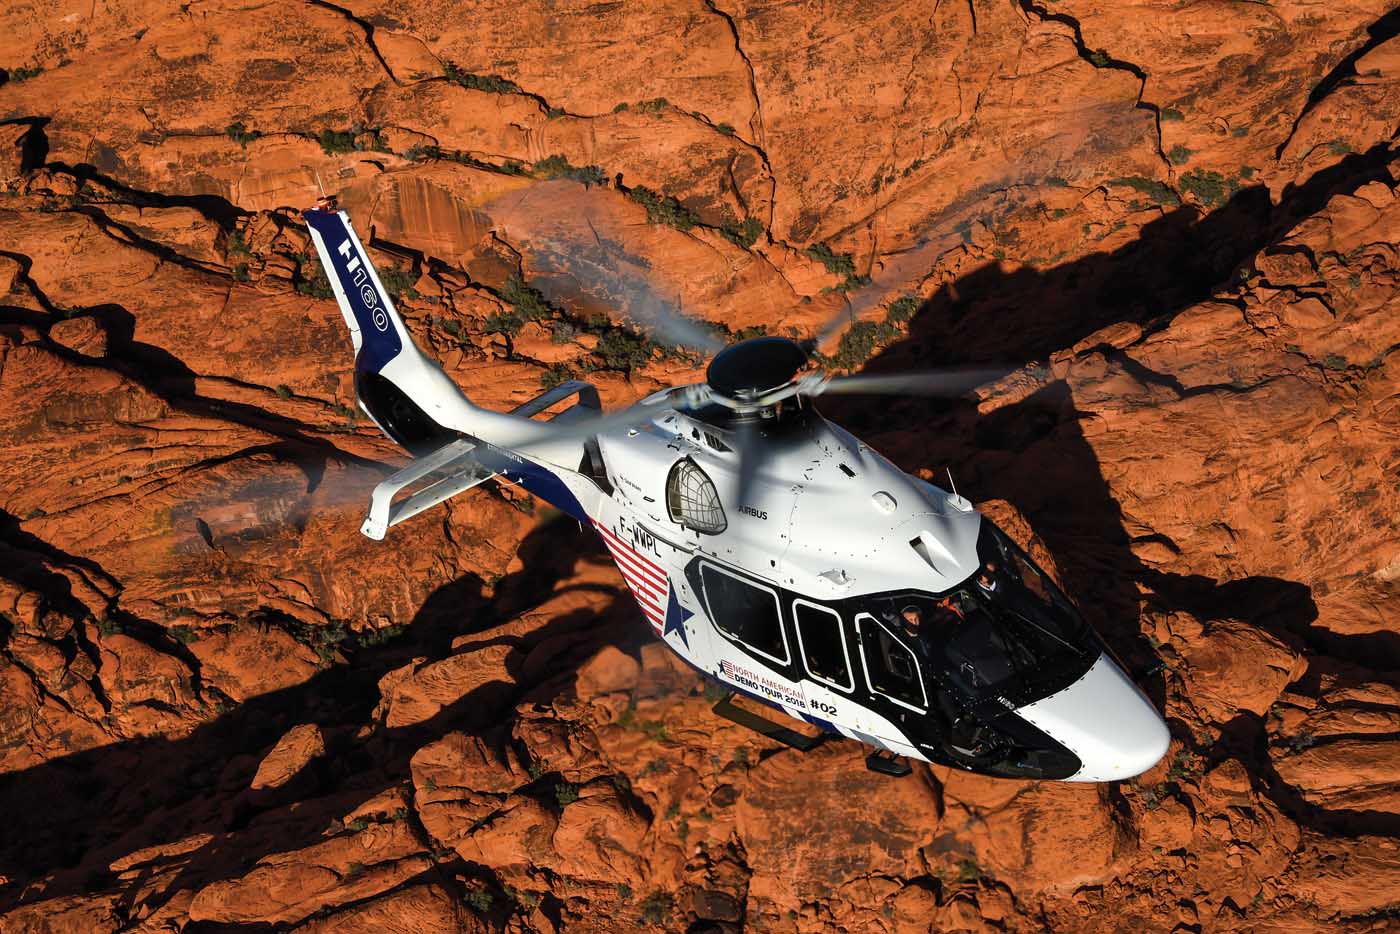 The second Airbus H160 prototypes flies near the Red Rock Canyon area west of Las Vegas in late February, prior to launching on its North American demo tour. Mike Reyno Photo